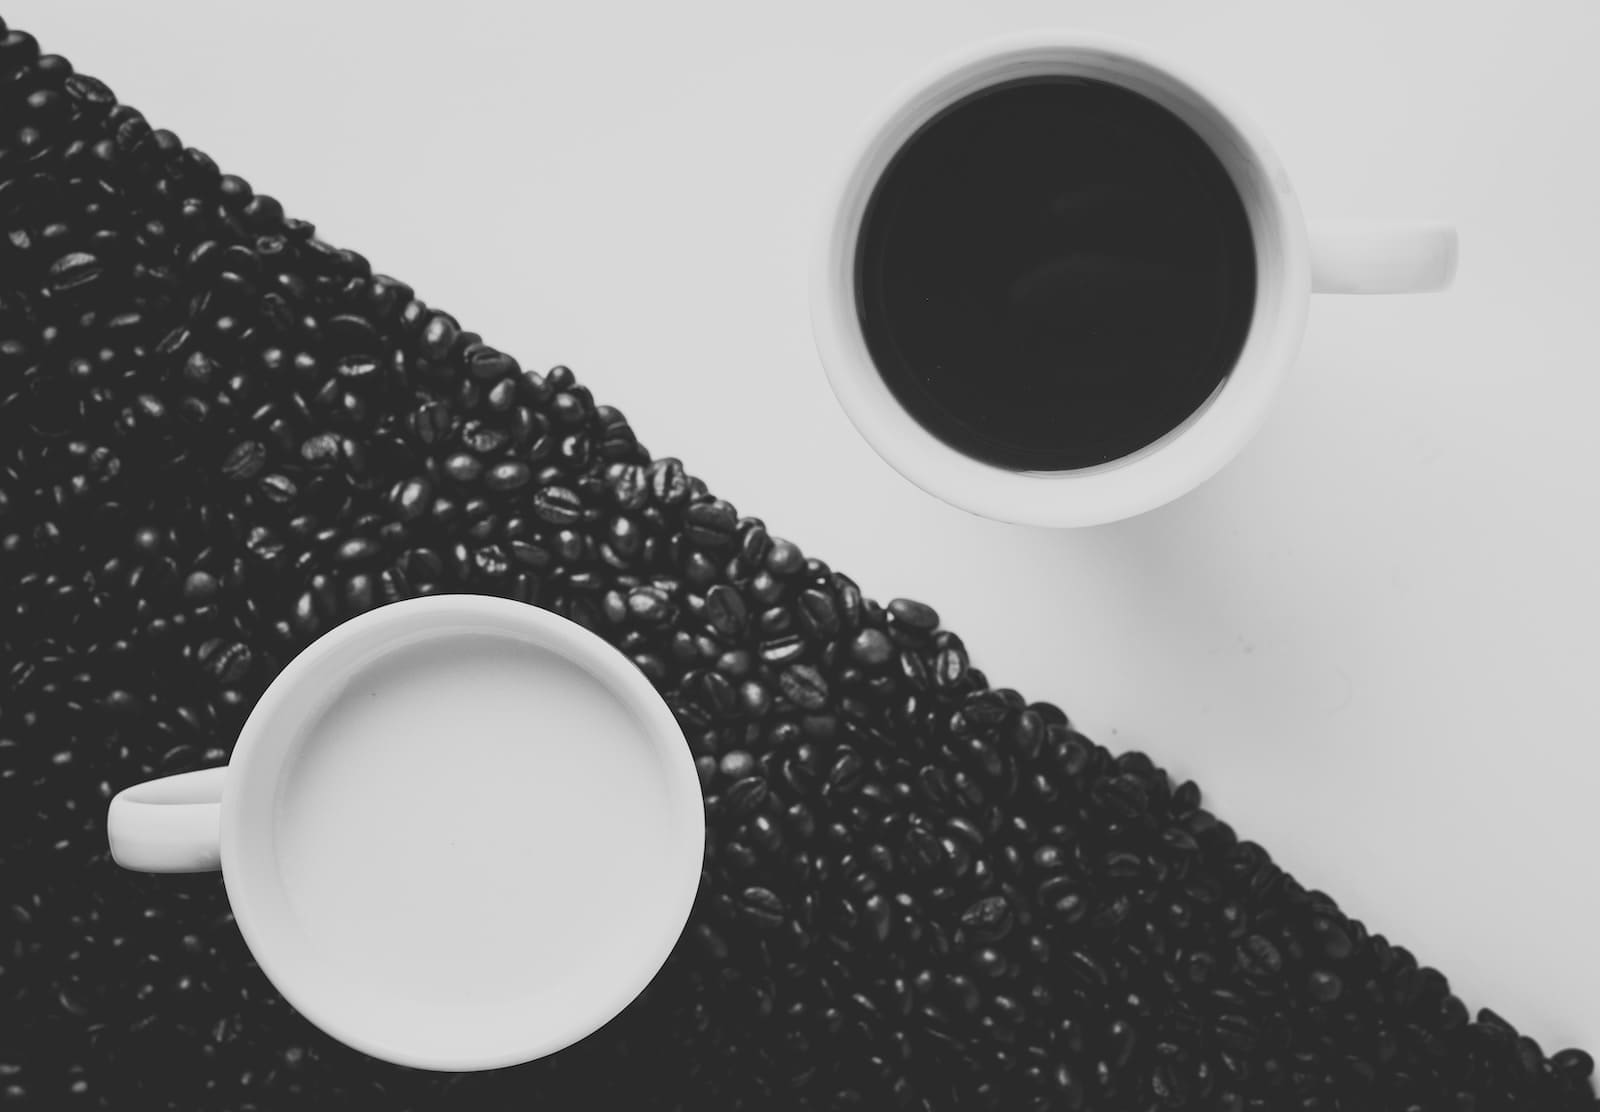 Two coffee mugs, black and white, set against a black and white background in the manner of a yin yan symbol, indicating lifestyle D/s is about symbiosis and balance